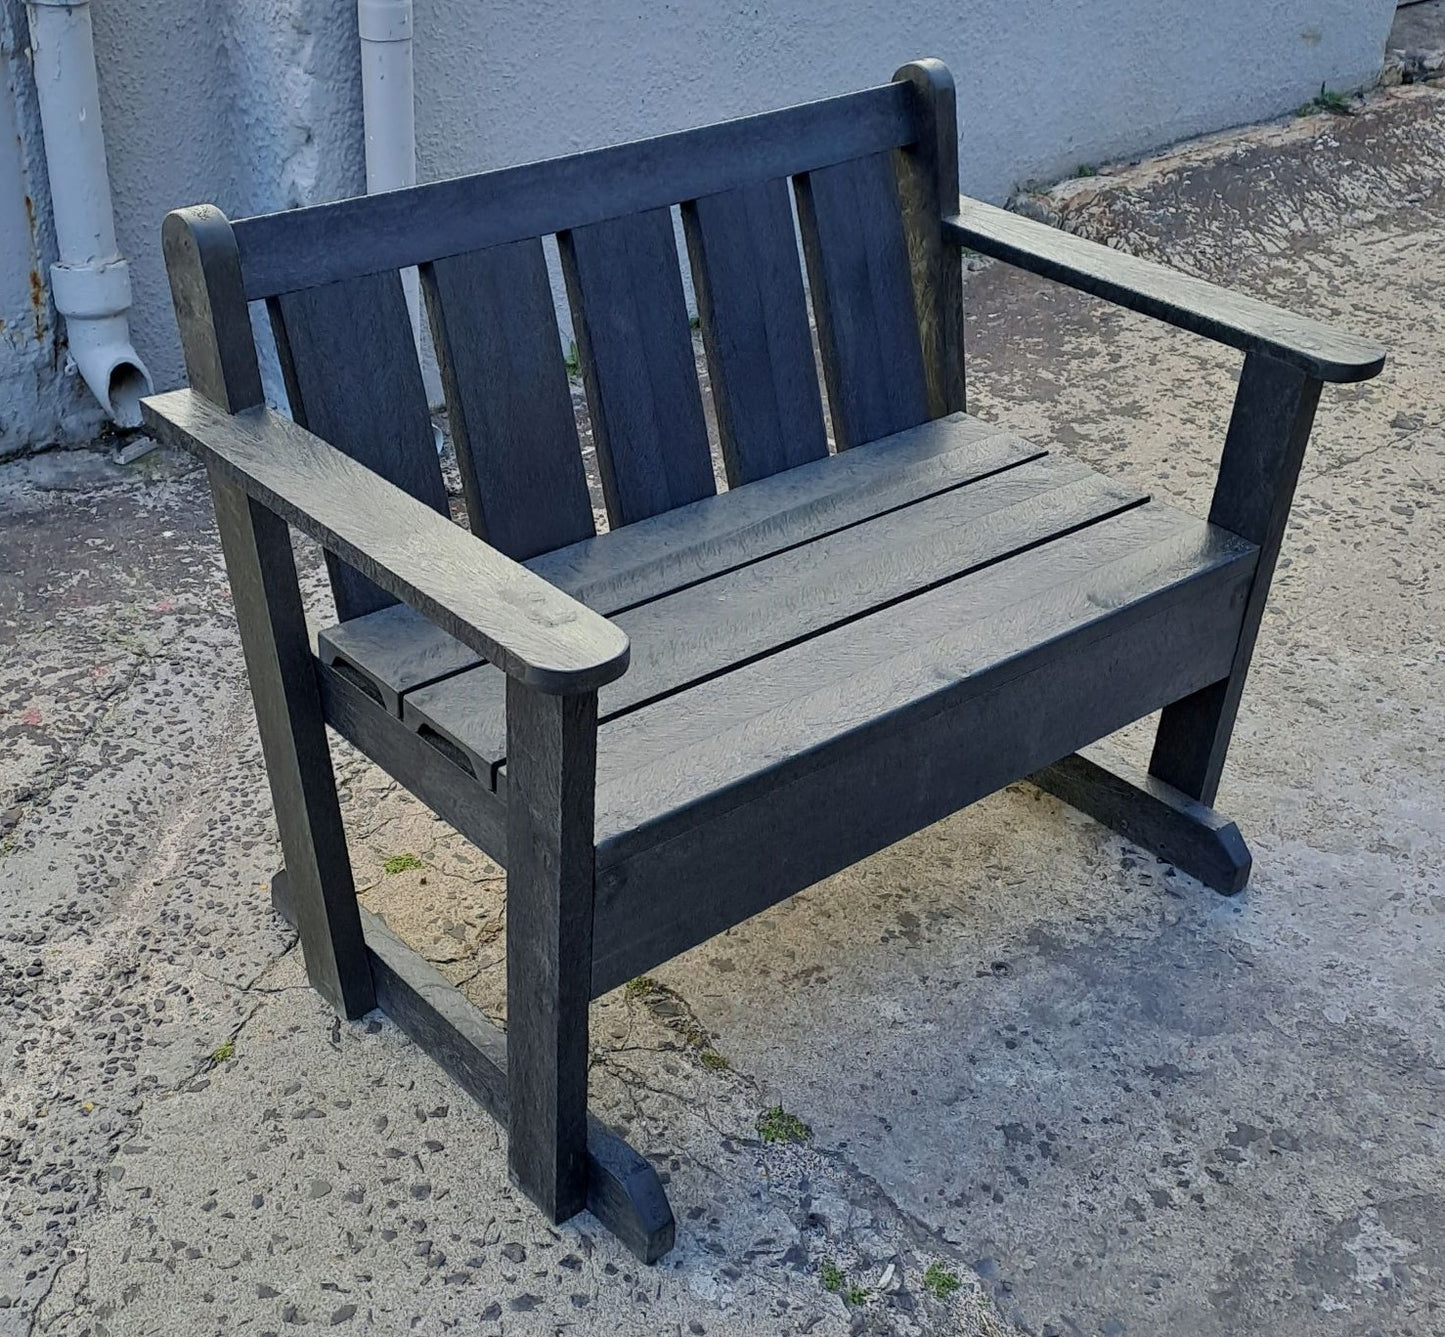 RECYCLED PLASTIC "BUDDY BENCH"